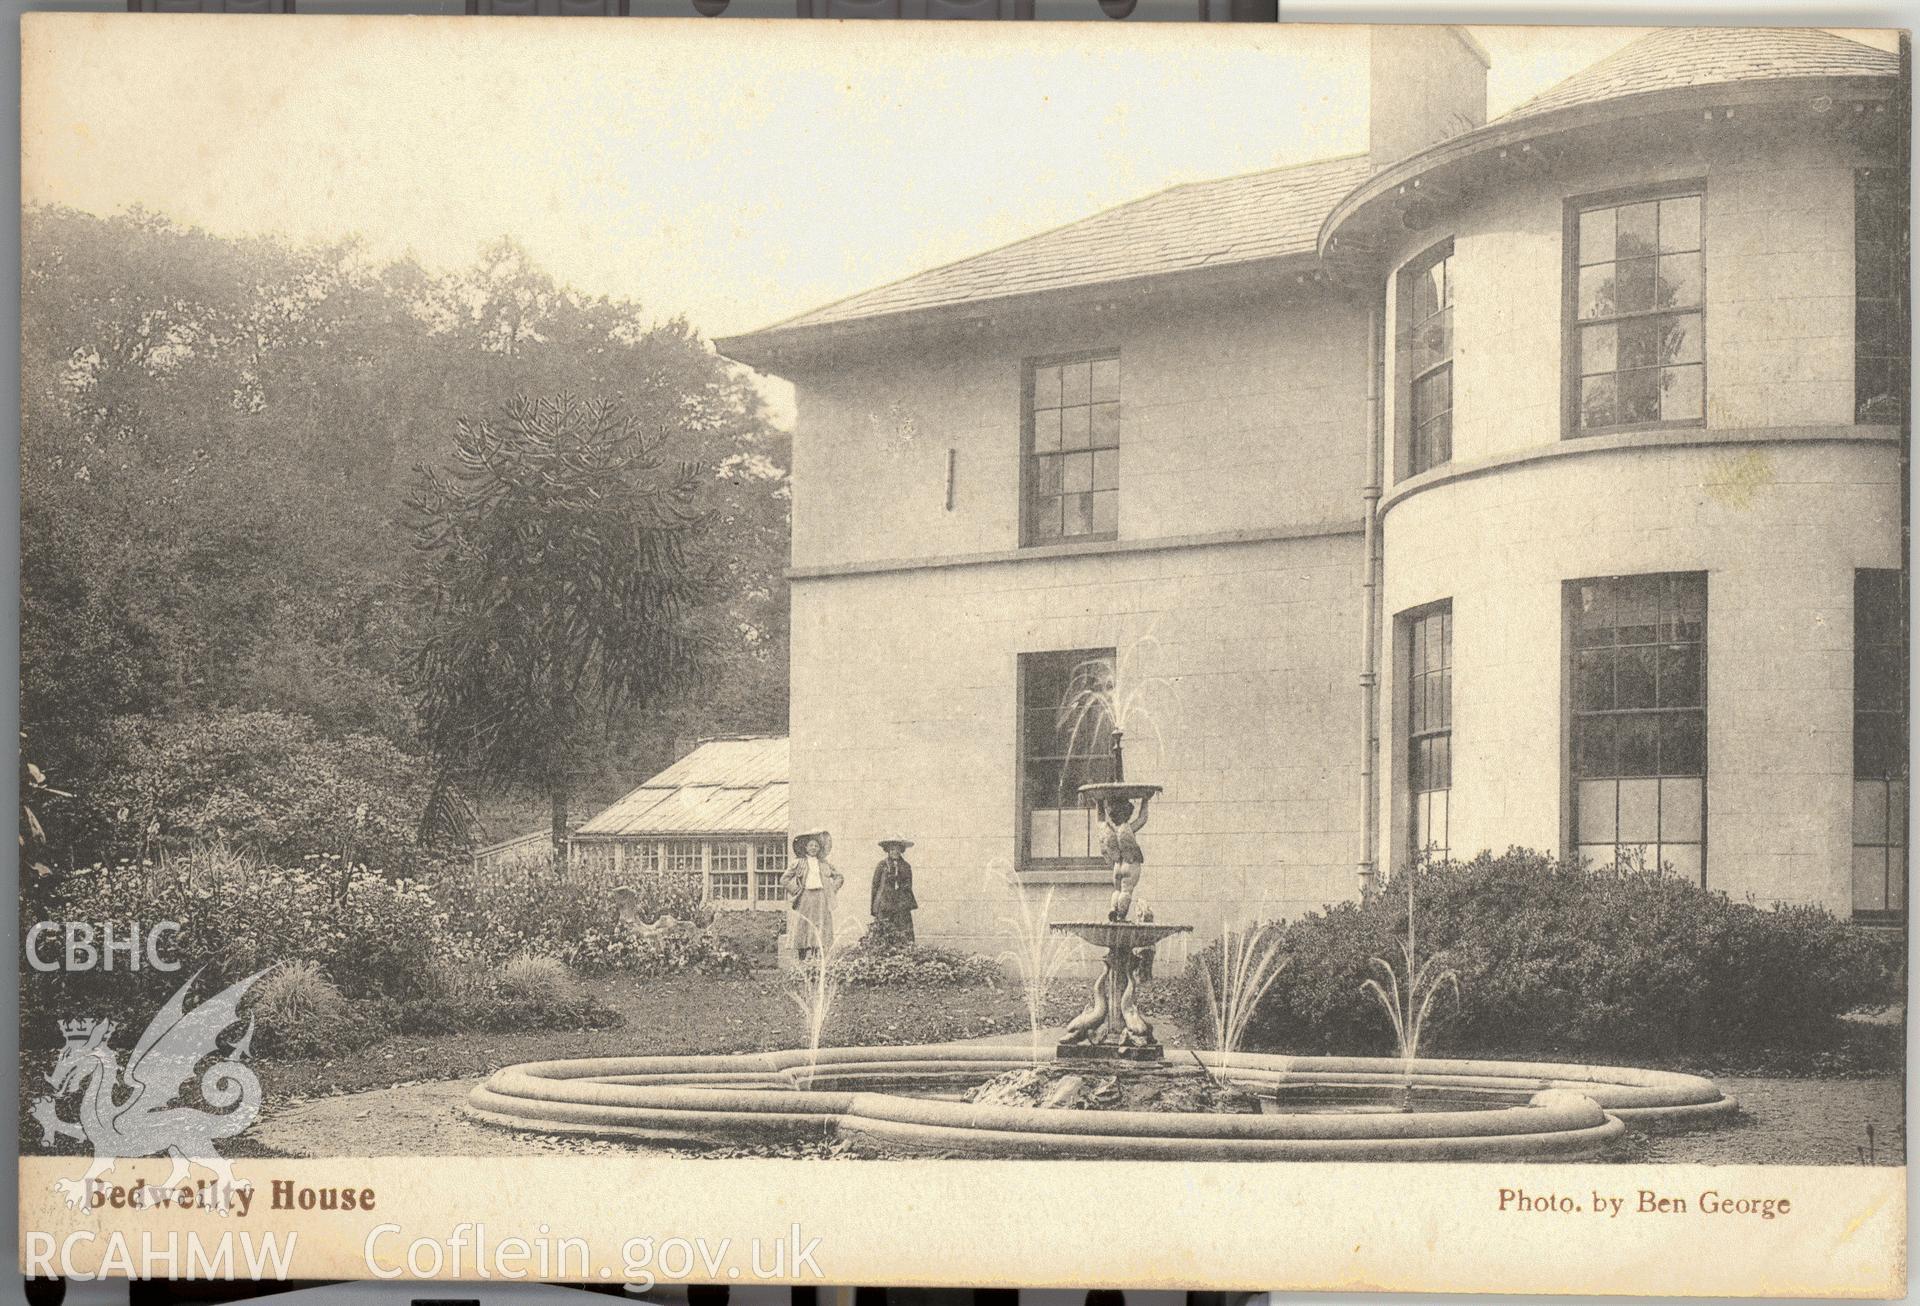 Digitised postcard image of Bedwellty House, Tredegar, including figures, Ben George, Published by A Morgan, Tredega. Produced by Parks and Gardens Data Services, from an original item in the Peter Davis Collection at Parks and Gardens UK. We hold only web-resolution images of this collection, suitable for viewing on screen and for research purposes only. We do not hold the original images, or publication quality scans.